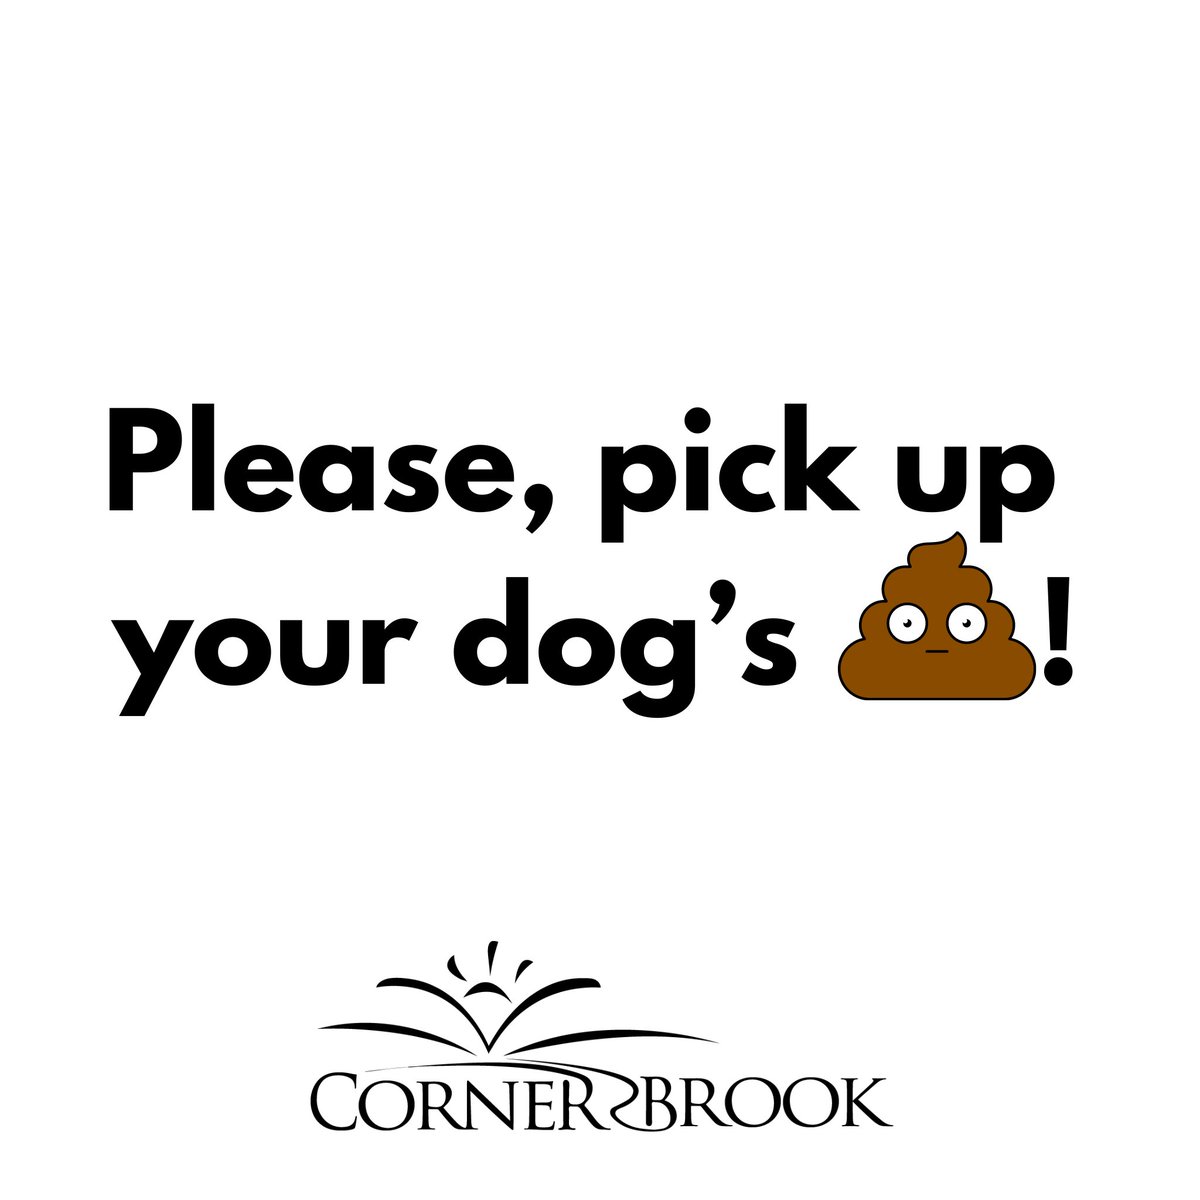 The spring snowmelt is revealing an awful lot of unsightly nuggets! Please respect your fellow residents and visitors who use our public walkways and trails. Pick up after your dogs! If you’ve forgotten your poop bags, there are some available our CB Trail Network’s trailheads.